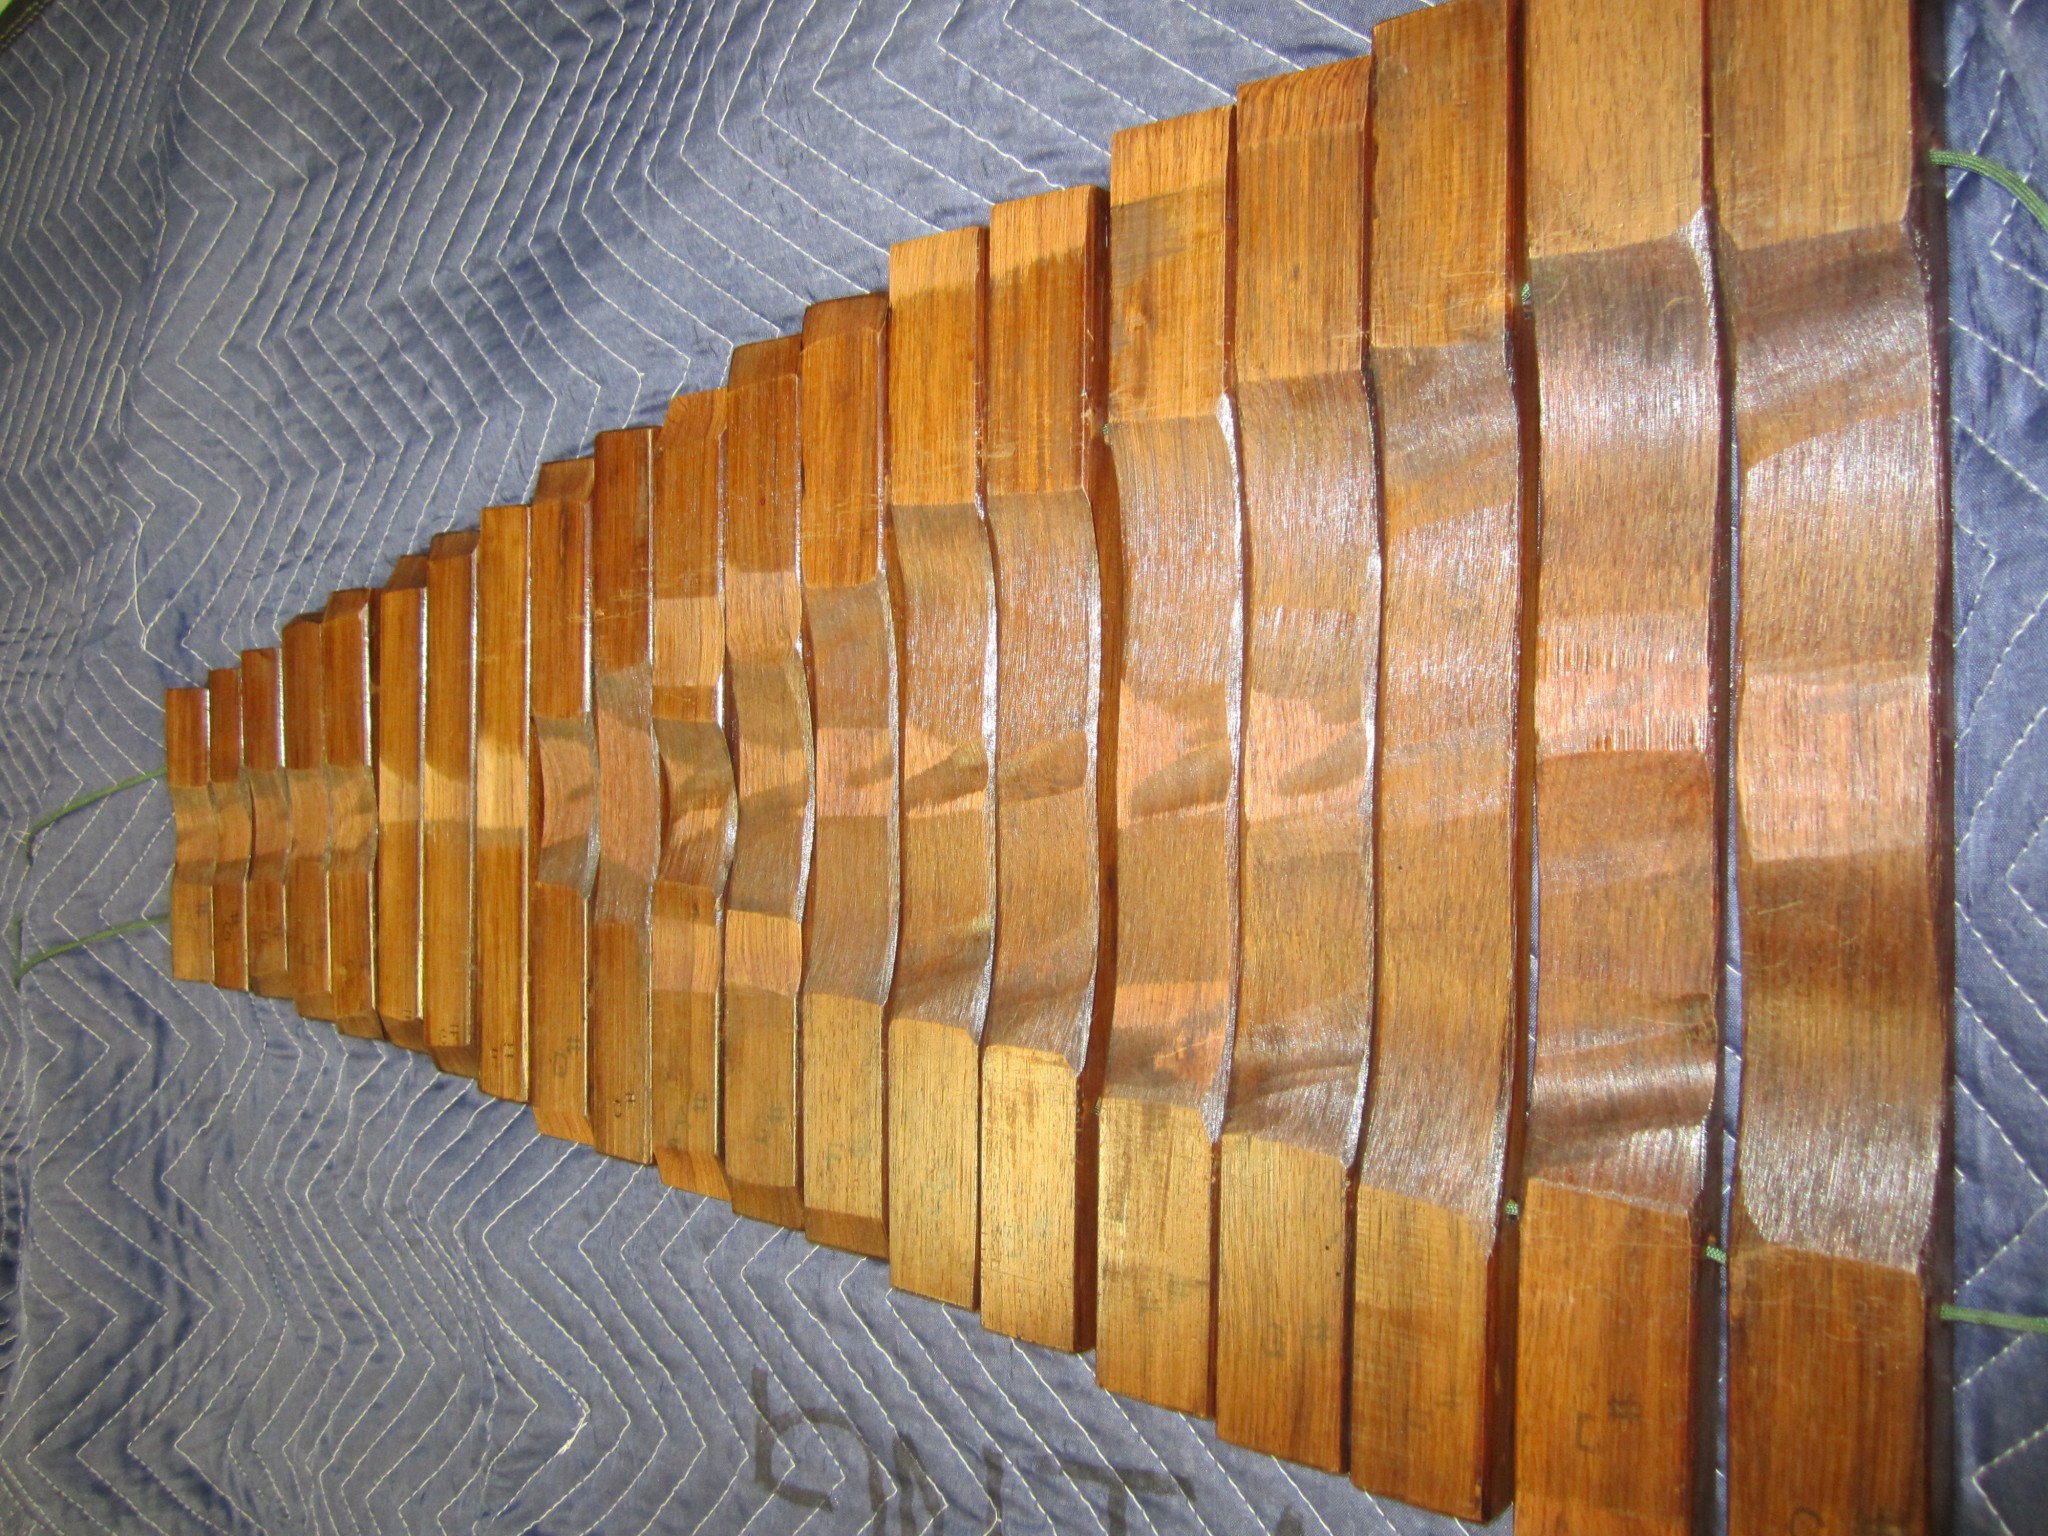 Shaped underside of some of the bars for a Kori Model 310 xylophone.